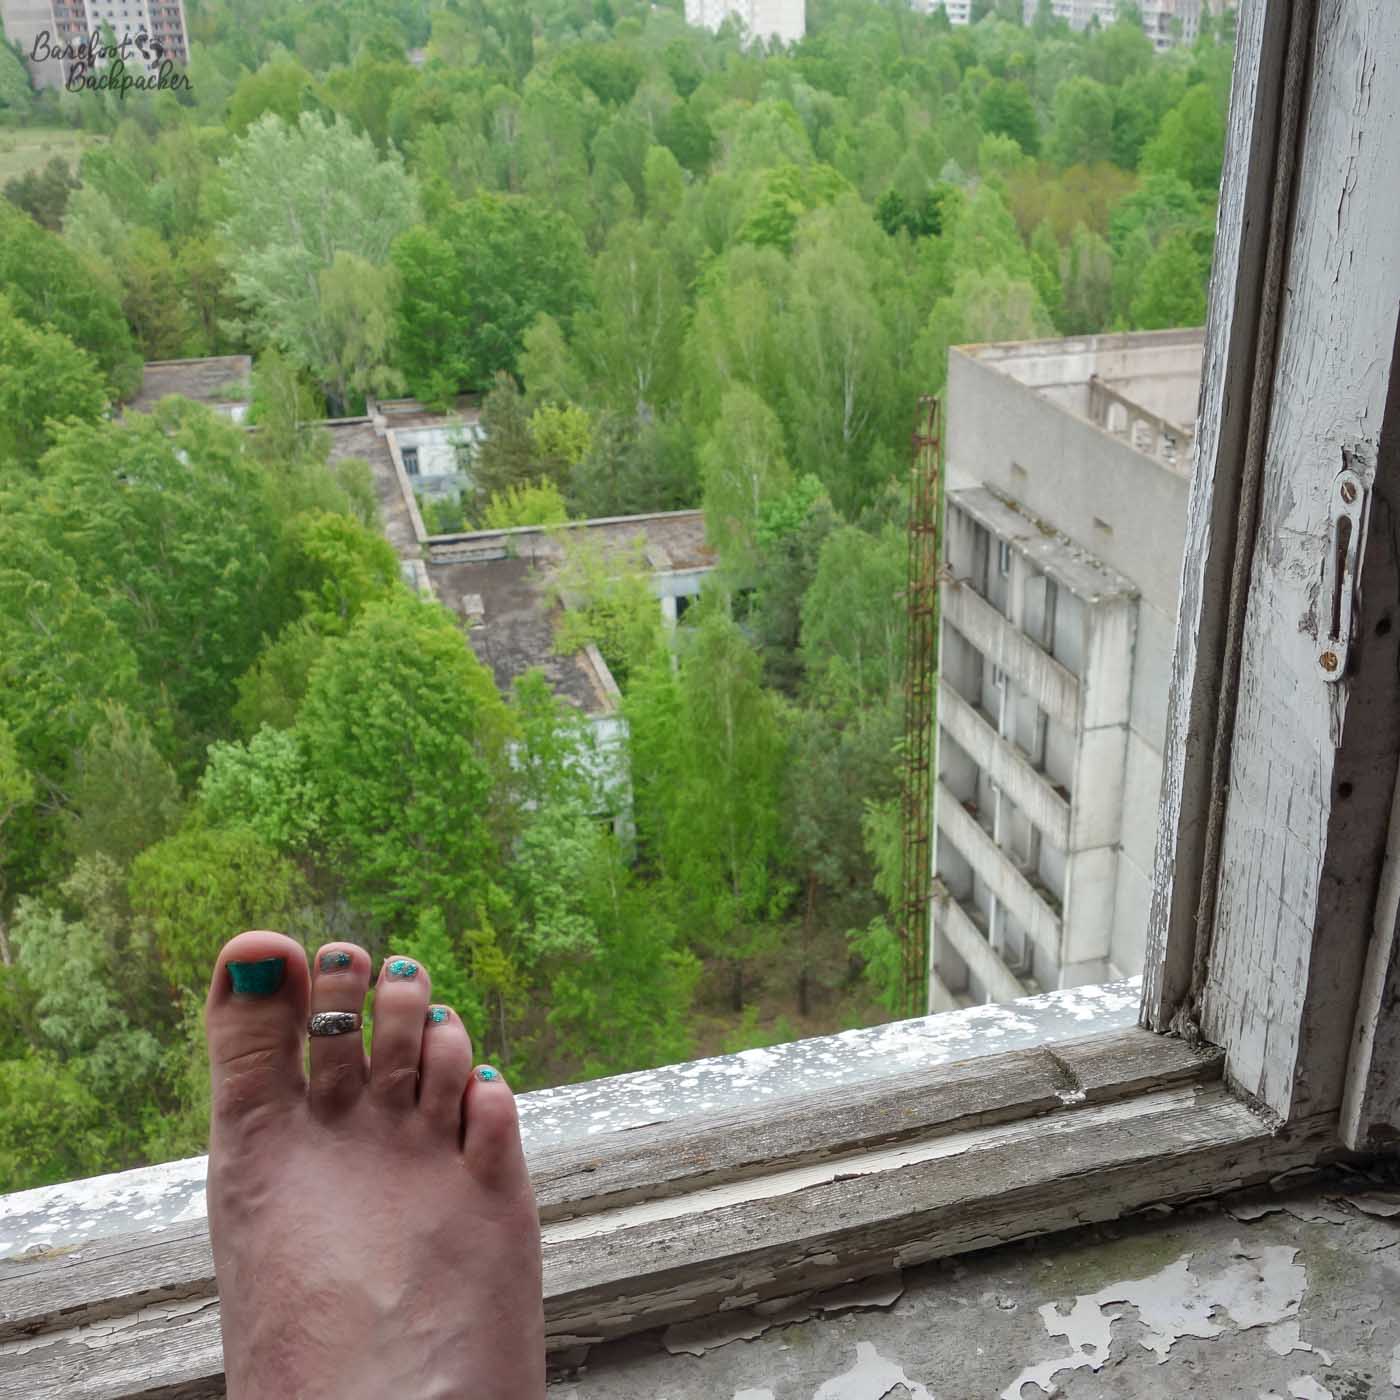 Picture taken from inside one of the apartments in Pripyat, looking out through a window. Outside are trees. In front of the window is one bare foot.